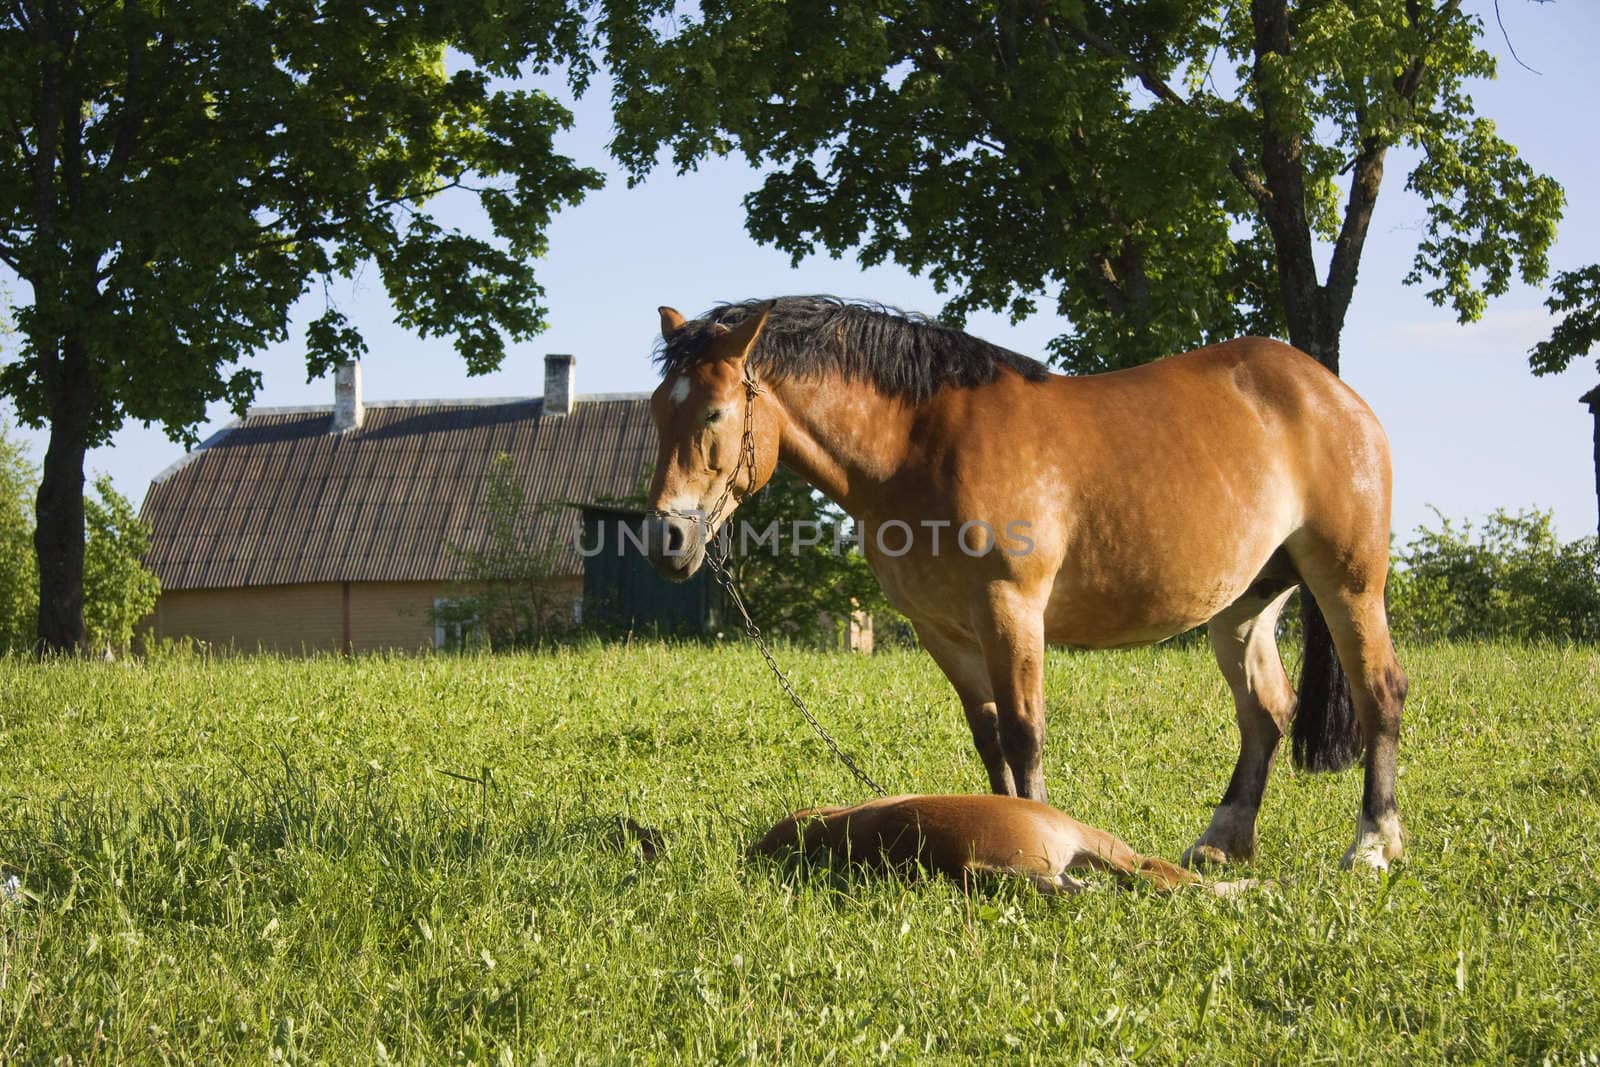 horse with a foal in a meadow